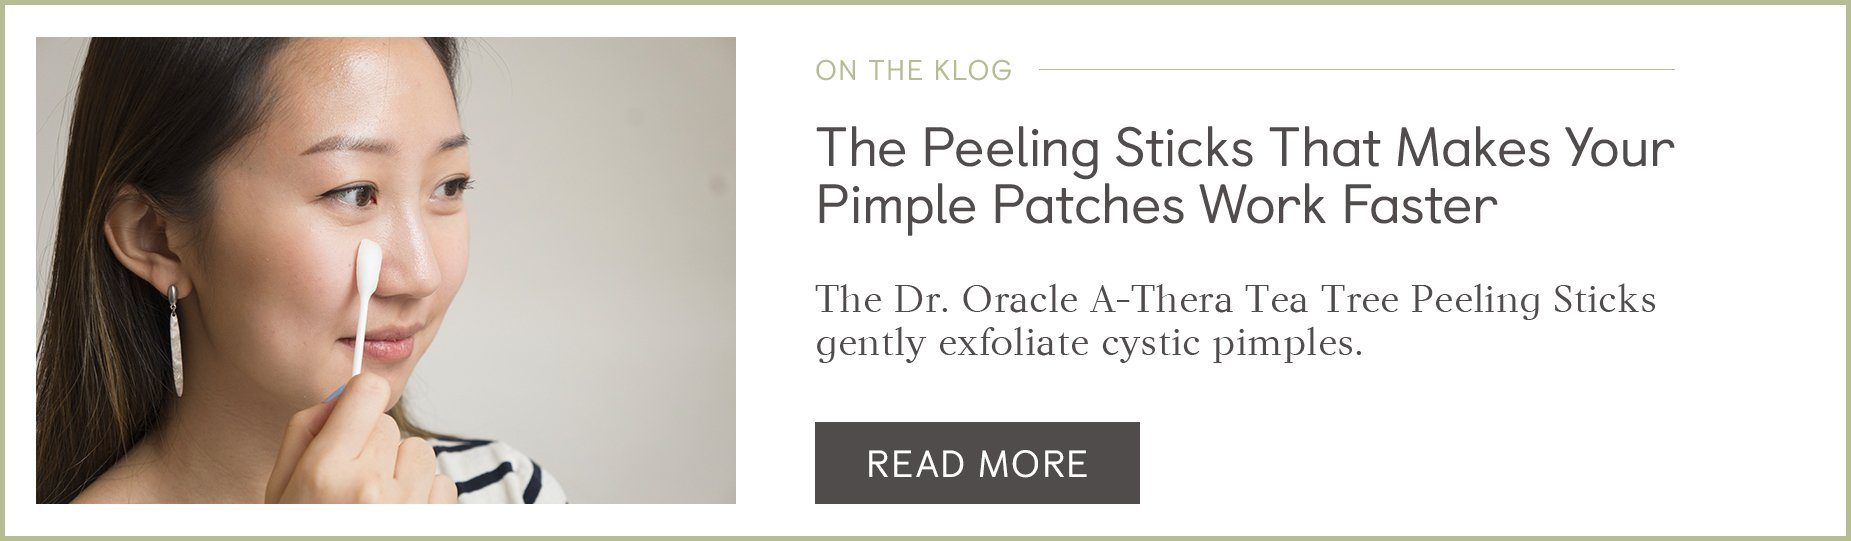 Learn more about the peeling stick that makes your pimple patches work faster